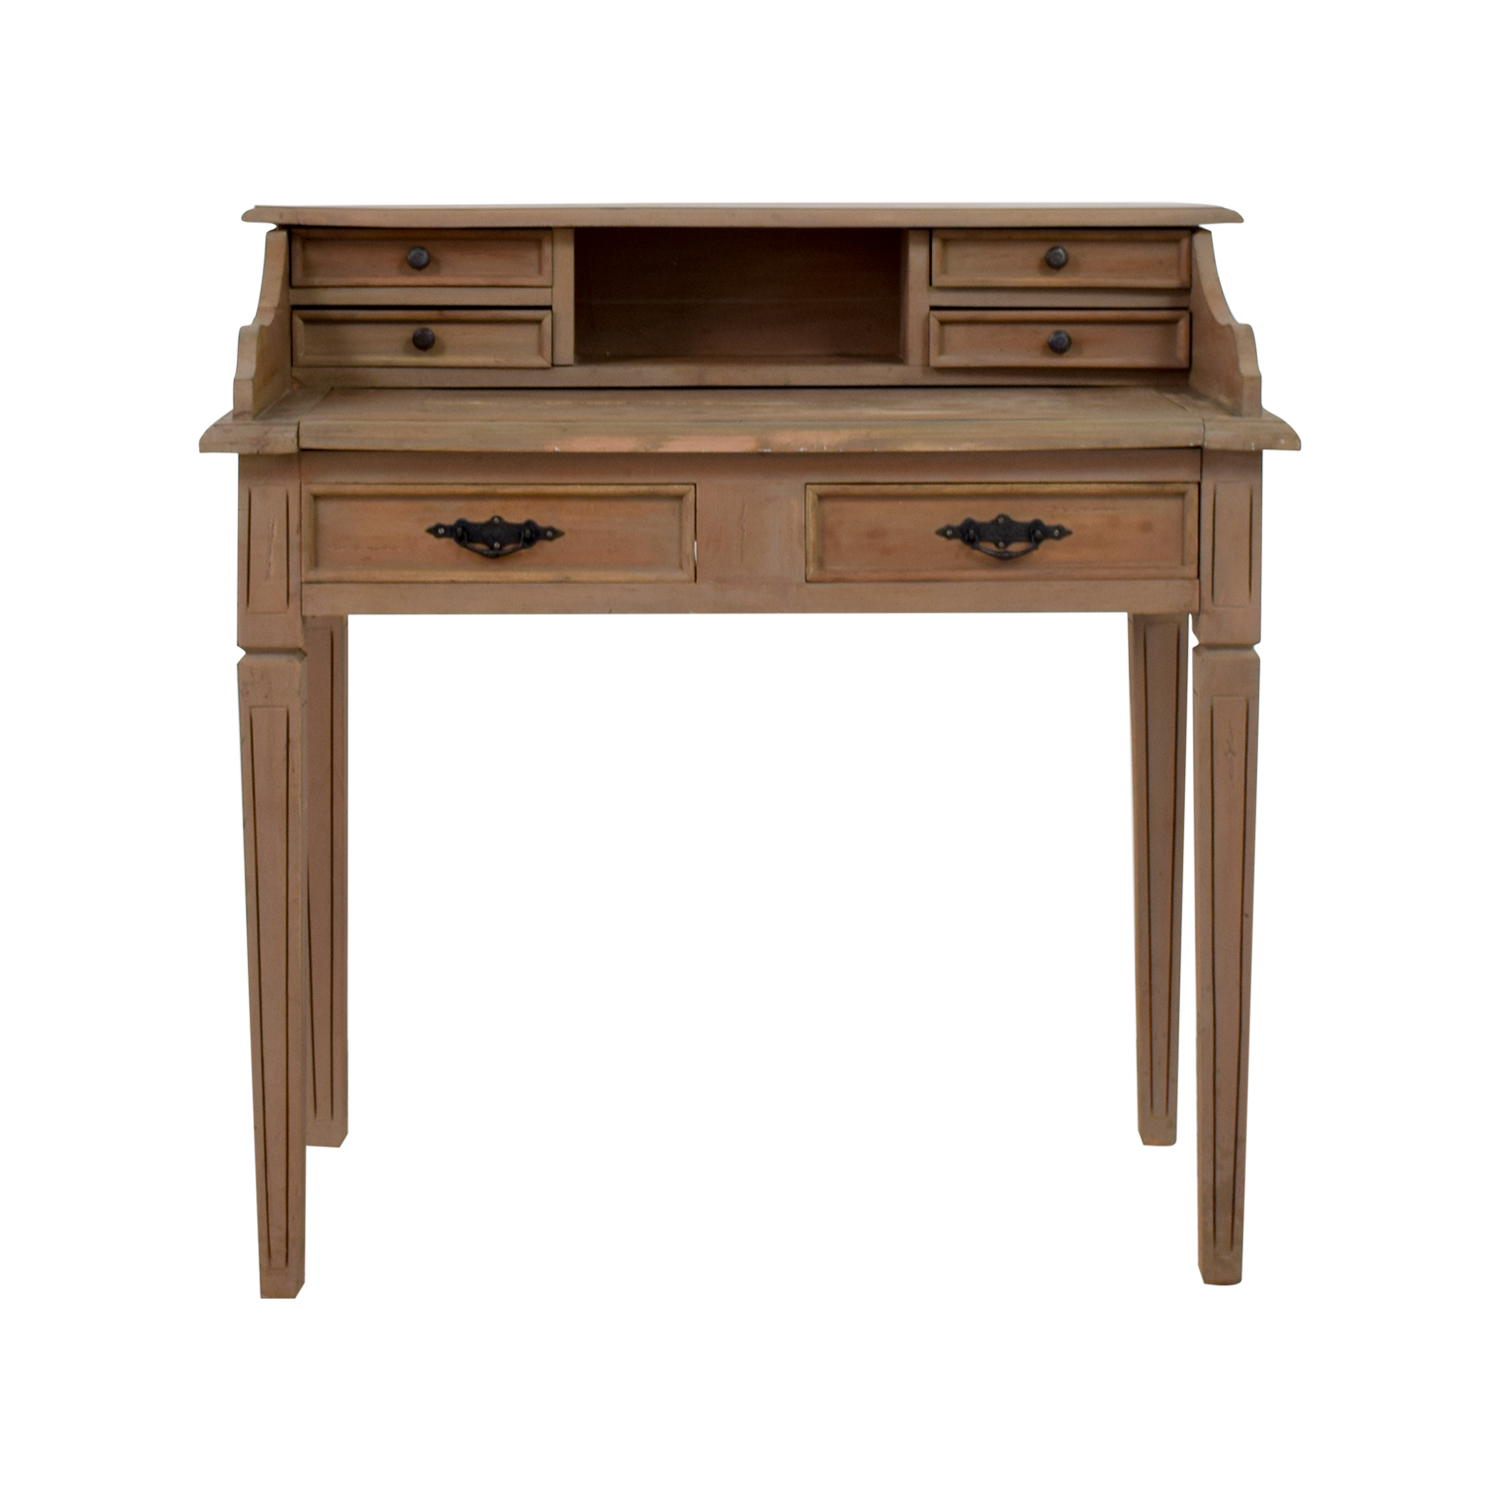 67% OFF - Wooden Desk with Small Hutch / Tables